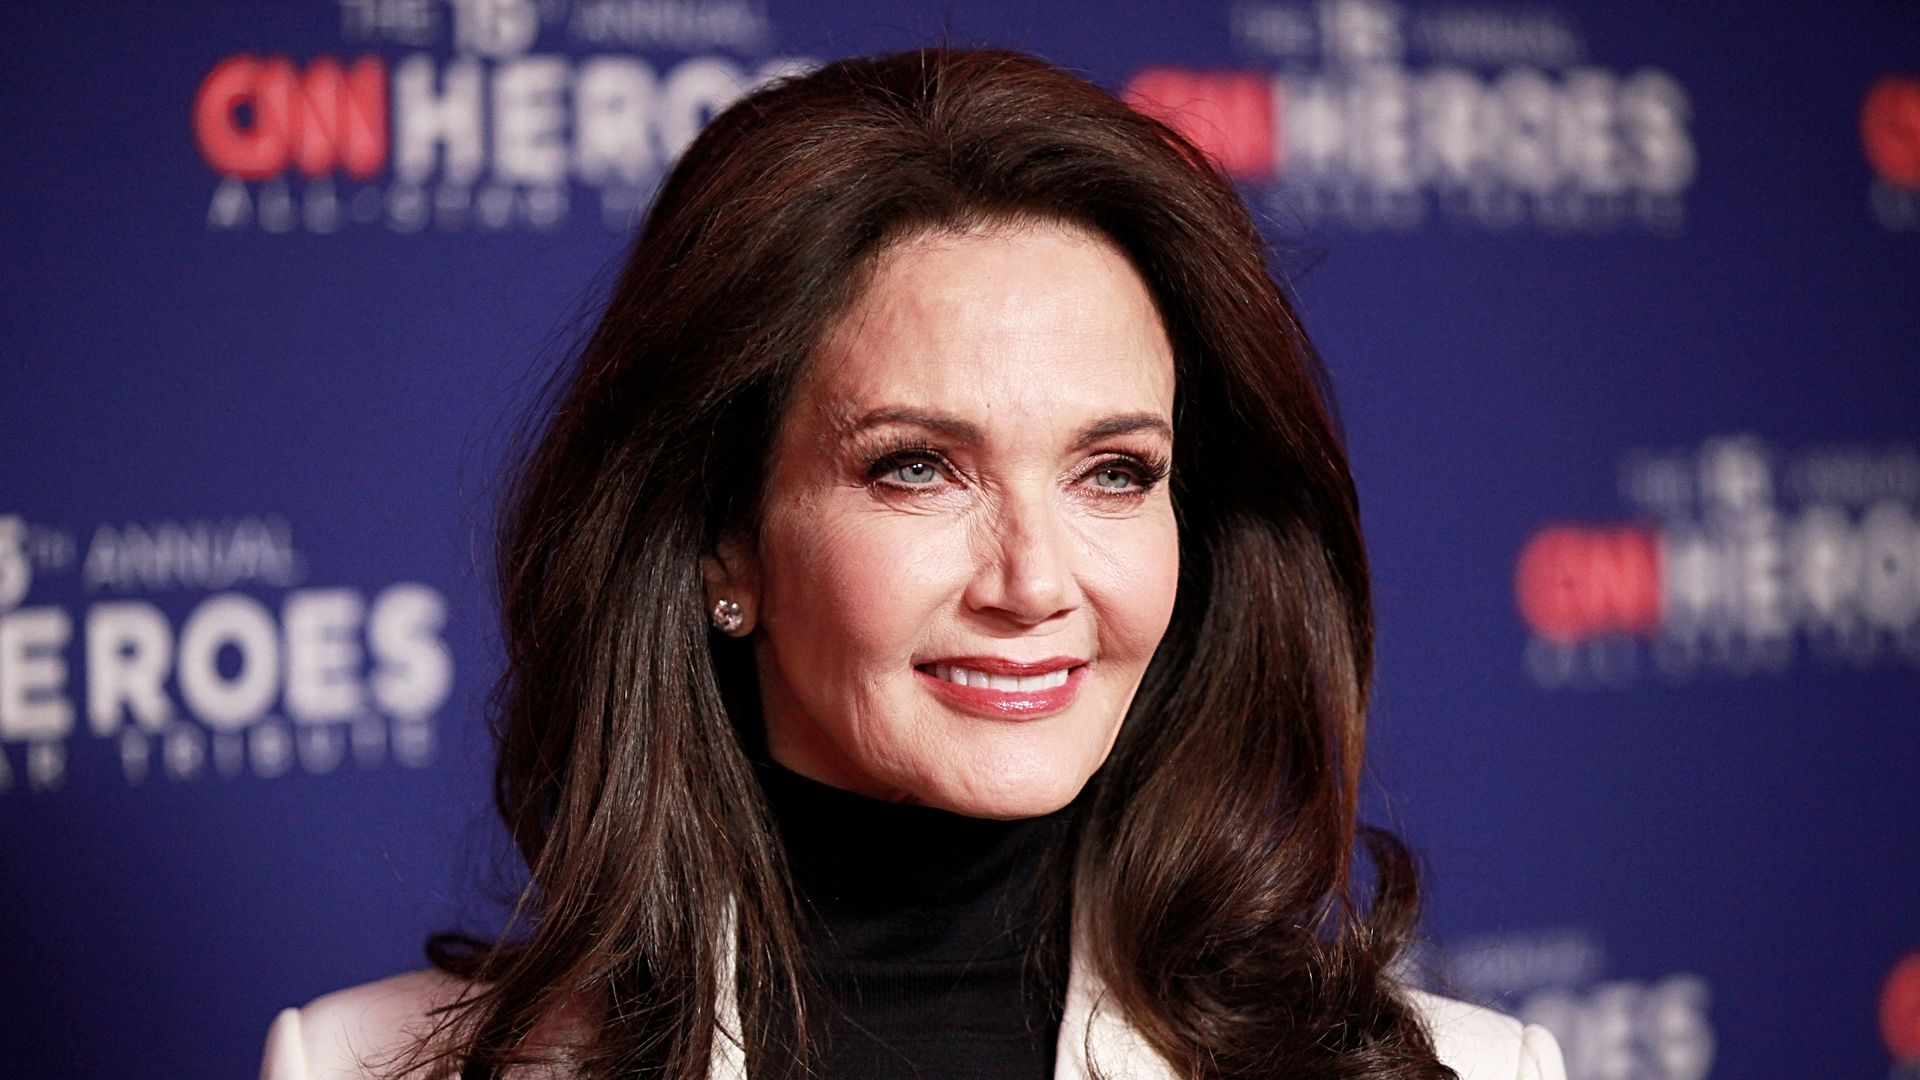 Lynda Carter, 72, is radiant with a bold beauty look at special political event with Barack Obama